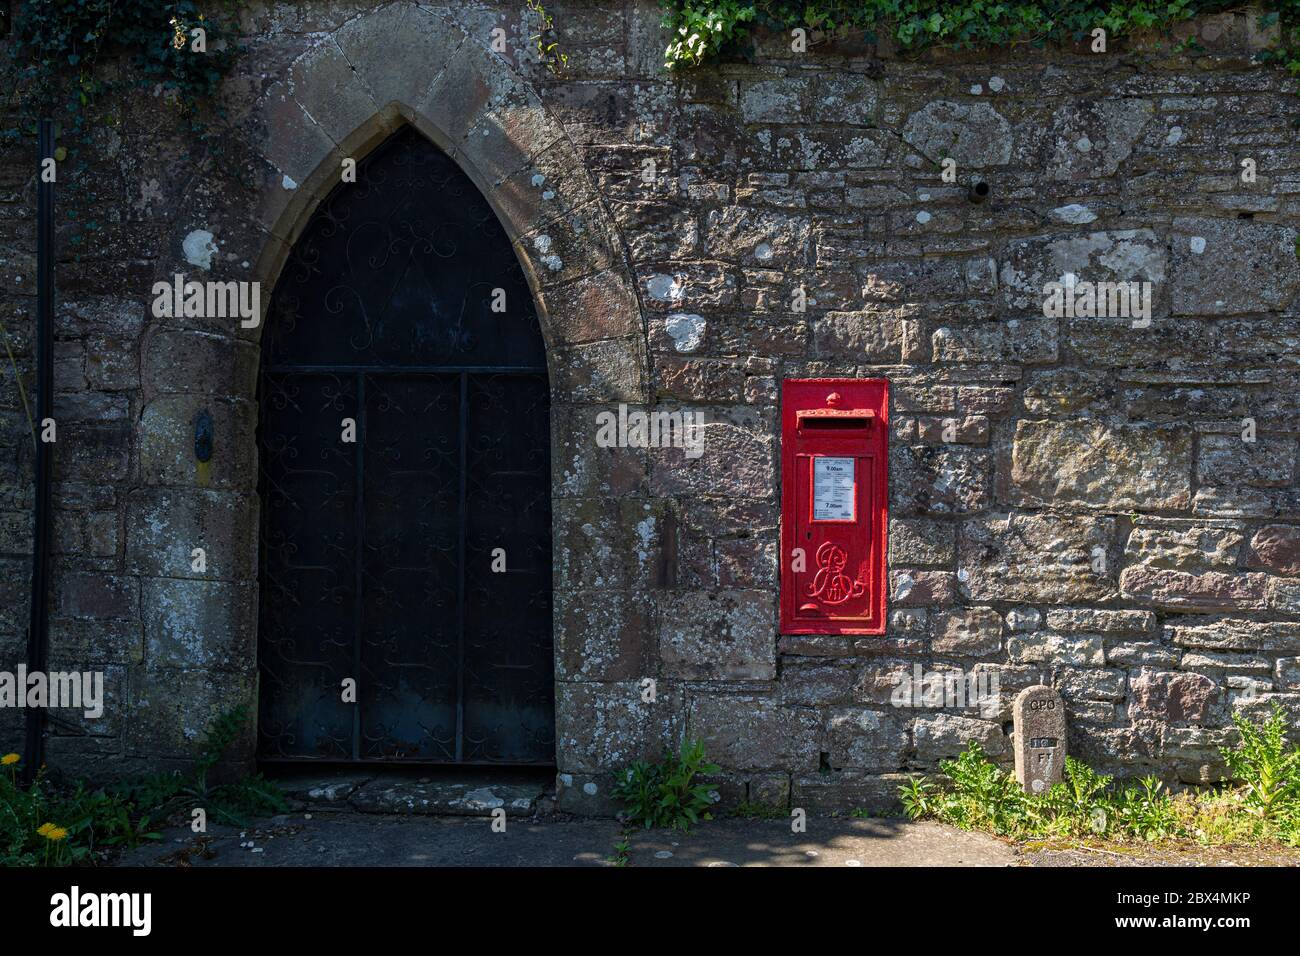 Wall letterbox marked with Edward VII cypher, in an old stone wall, Tintern, Monmouthshire, Wales Stock Photo